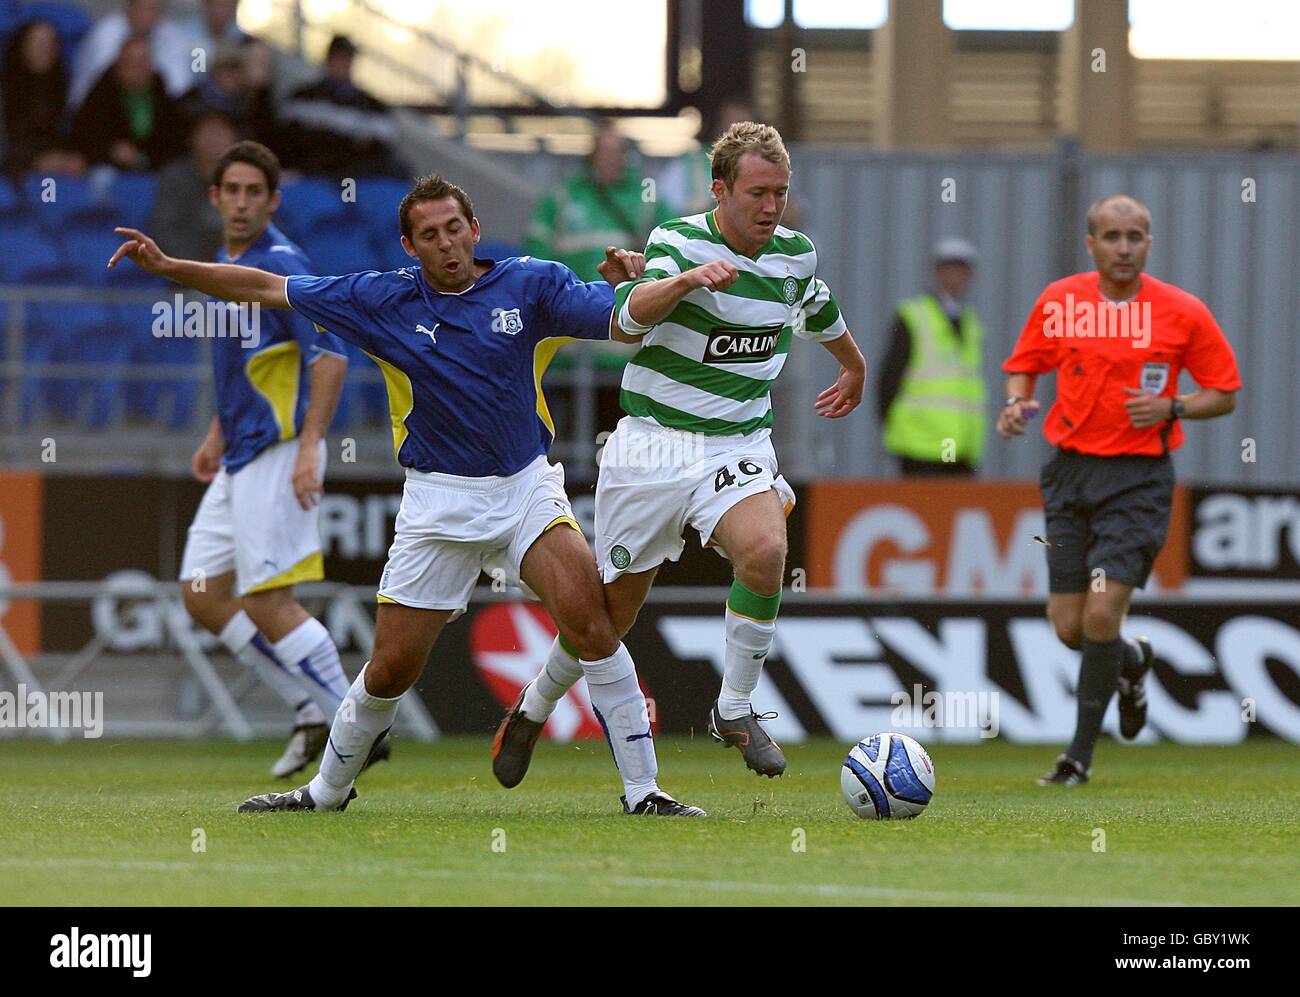 2009-07-22: Cardiff City 0-0 Celtic, Friendly – Pictures – The